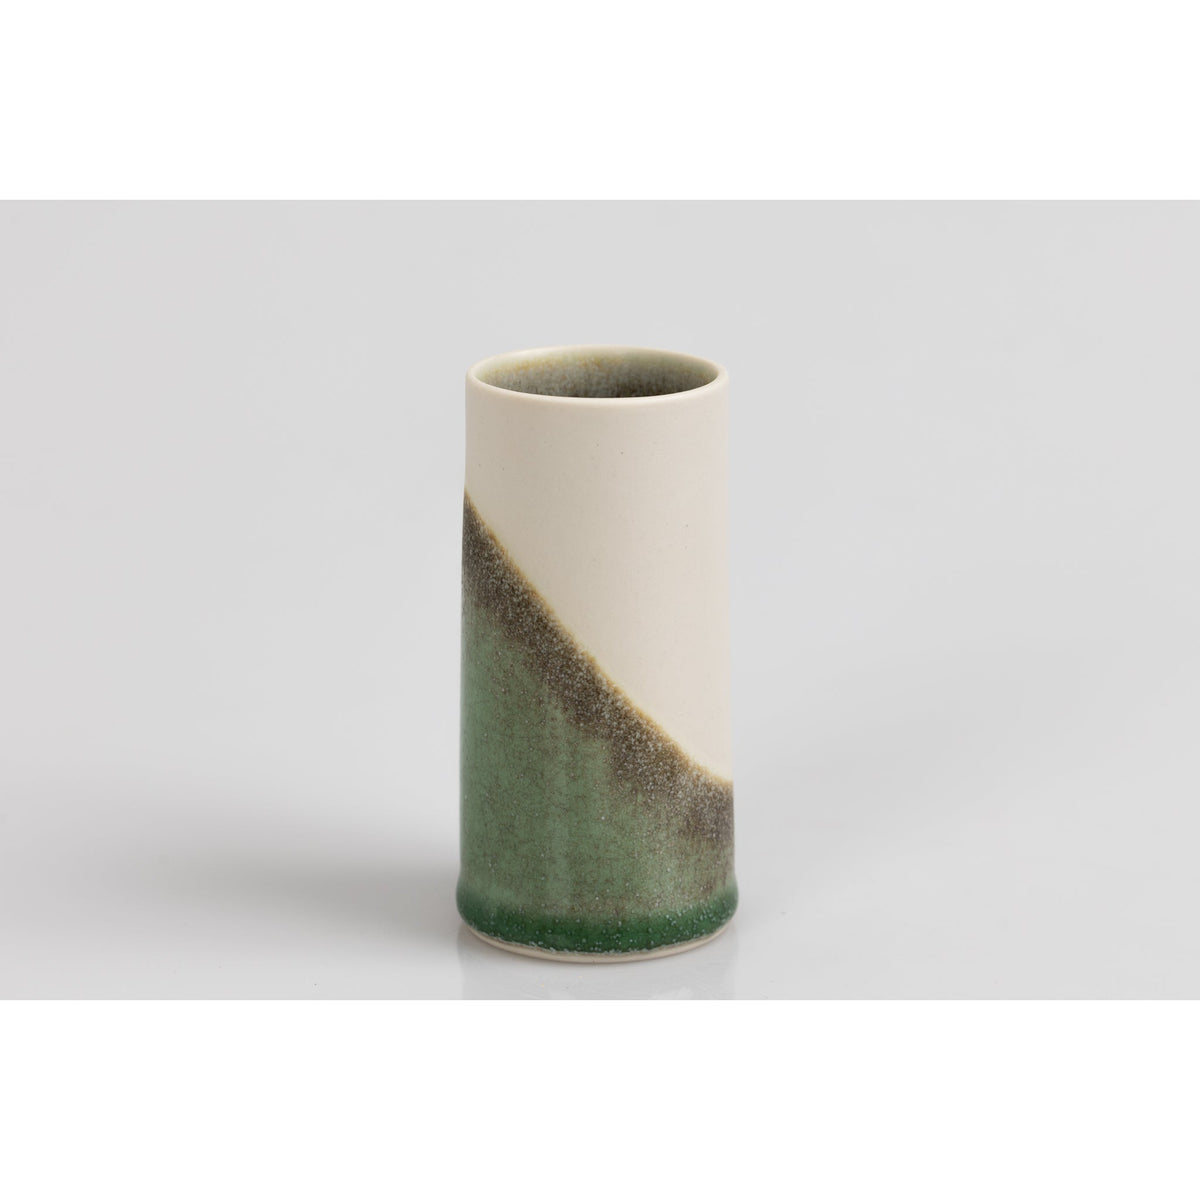 KSN3 South Downs III, Tapered Vessel by Kate Schuricht, available at Padstow Gallery, Cornwall